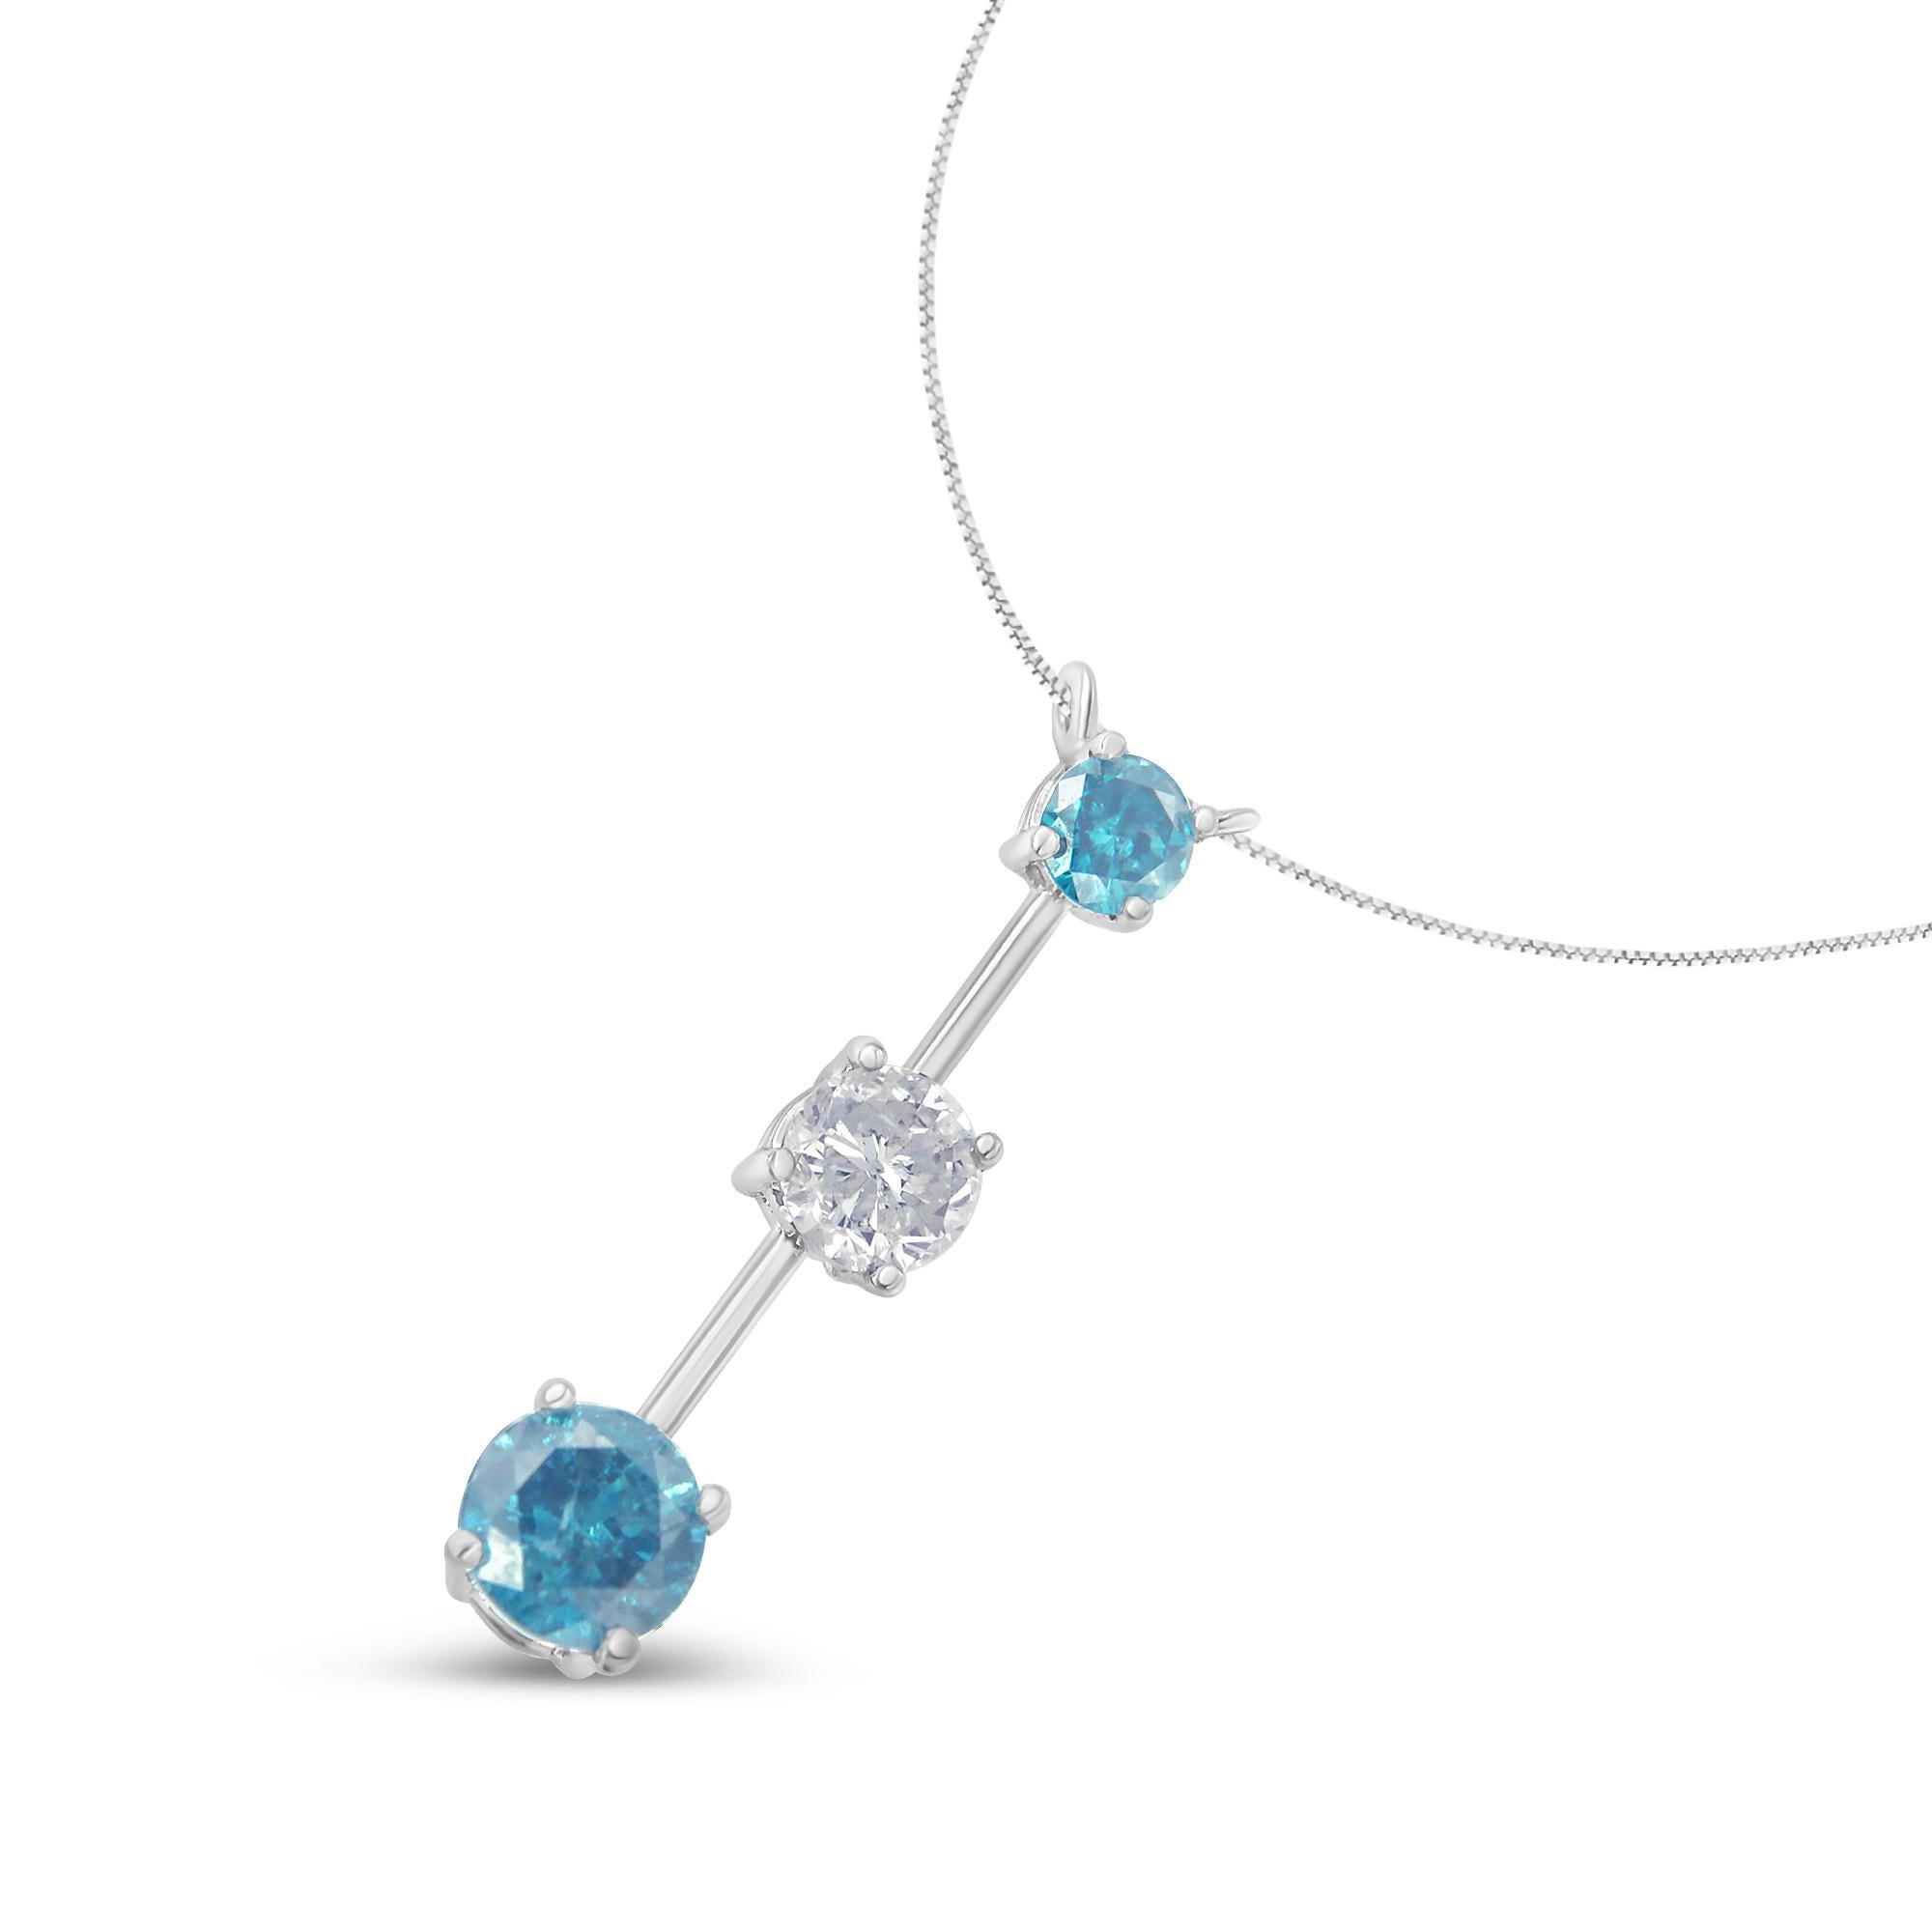 Contemporary 14K White Gold 1 1/2 Carat White and Treated Blue Diamond Pendant Necklace For Sale